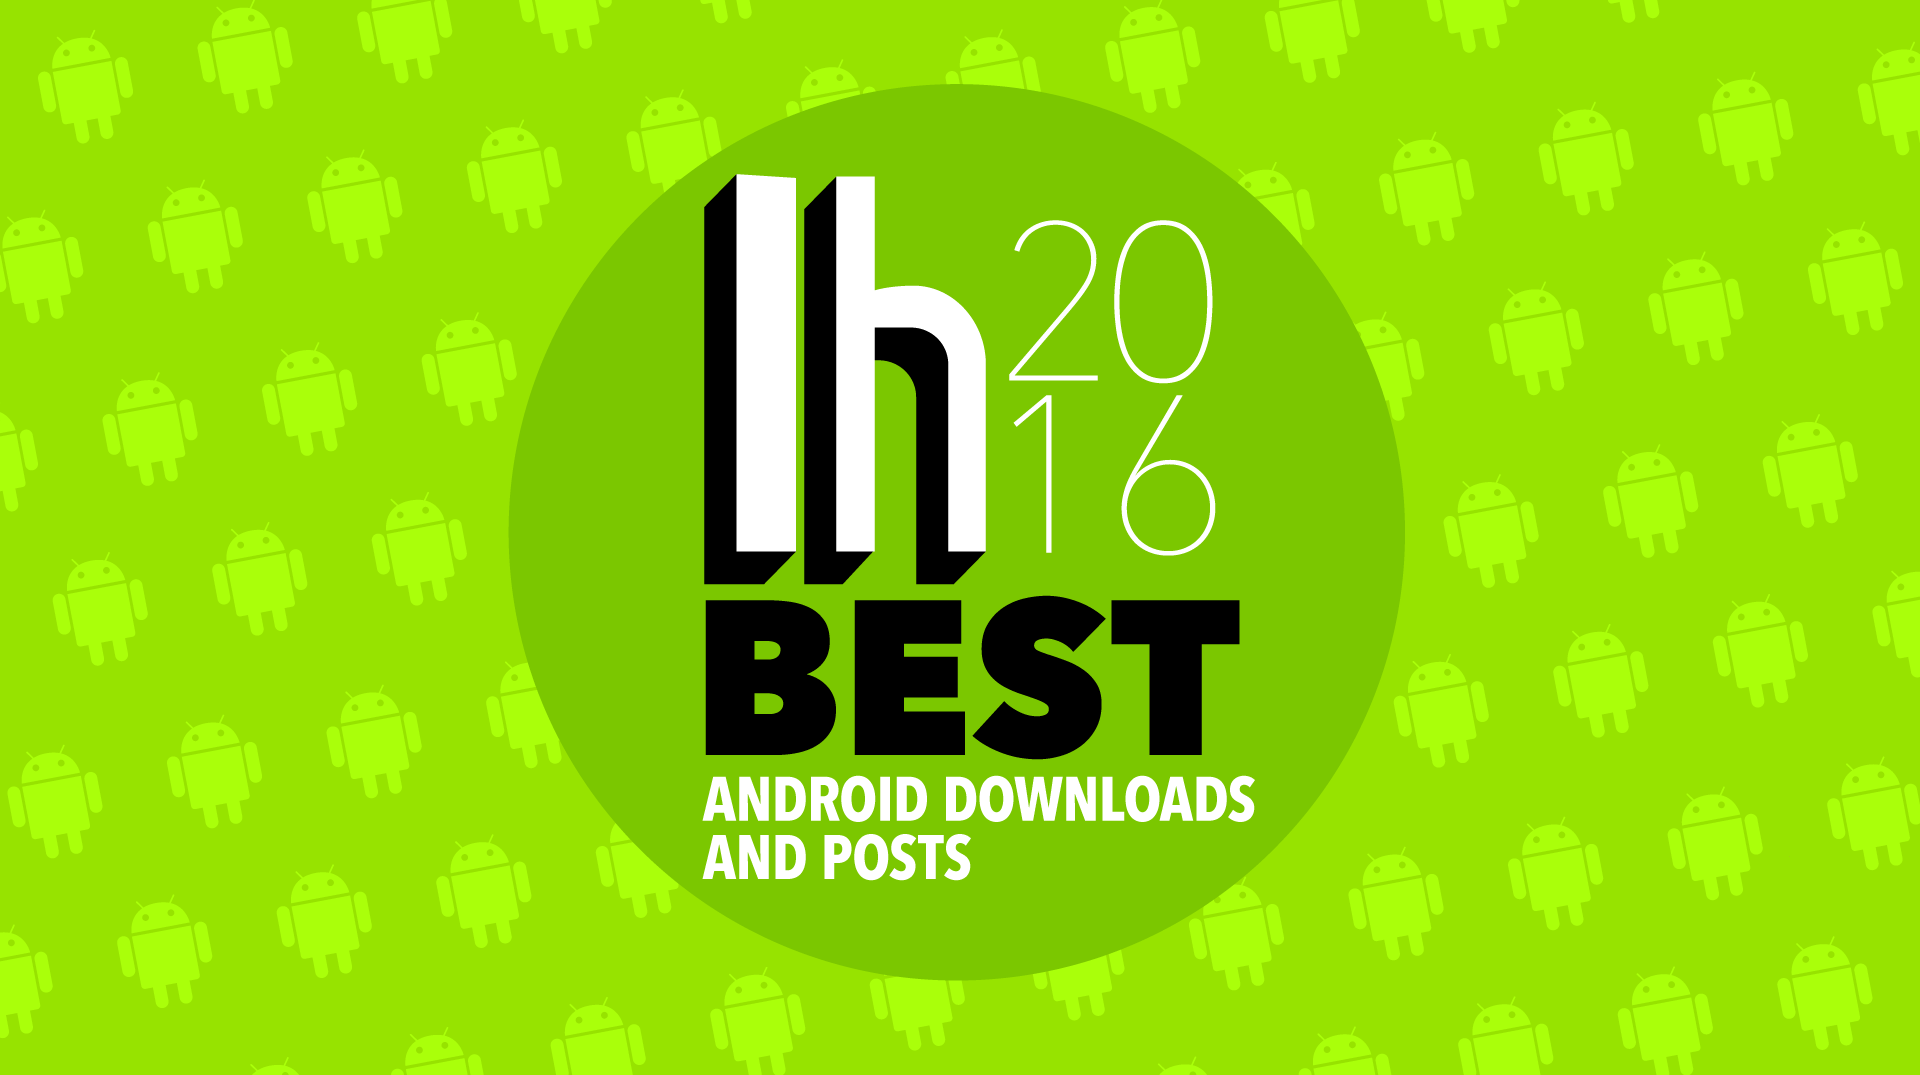 Most Popular Android Downloads And Posts Of 2016